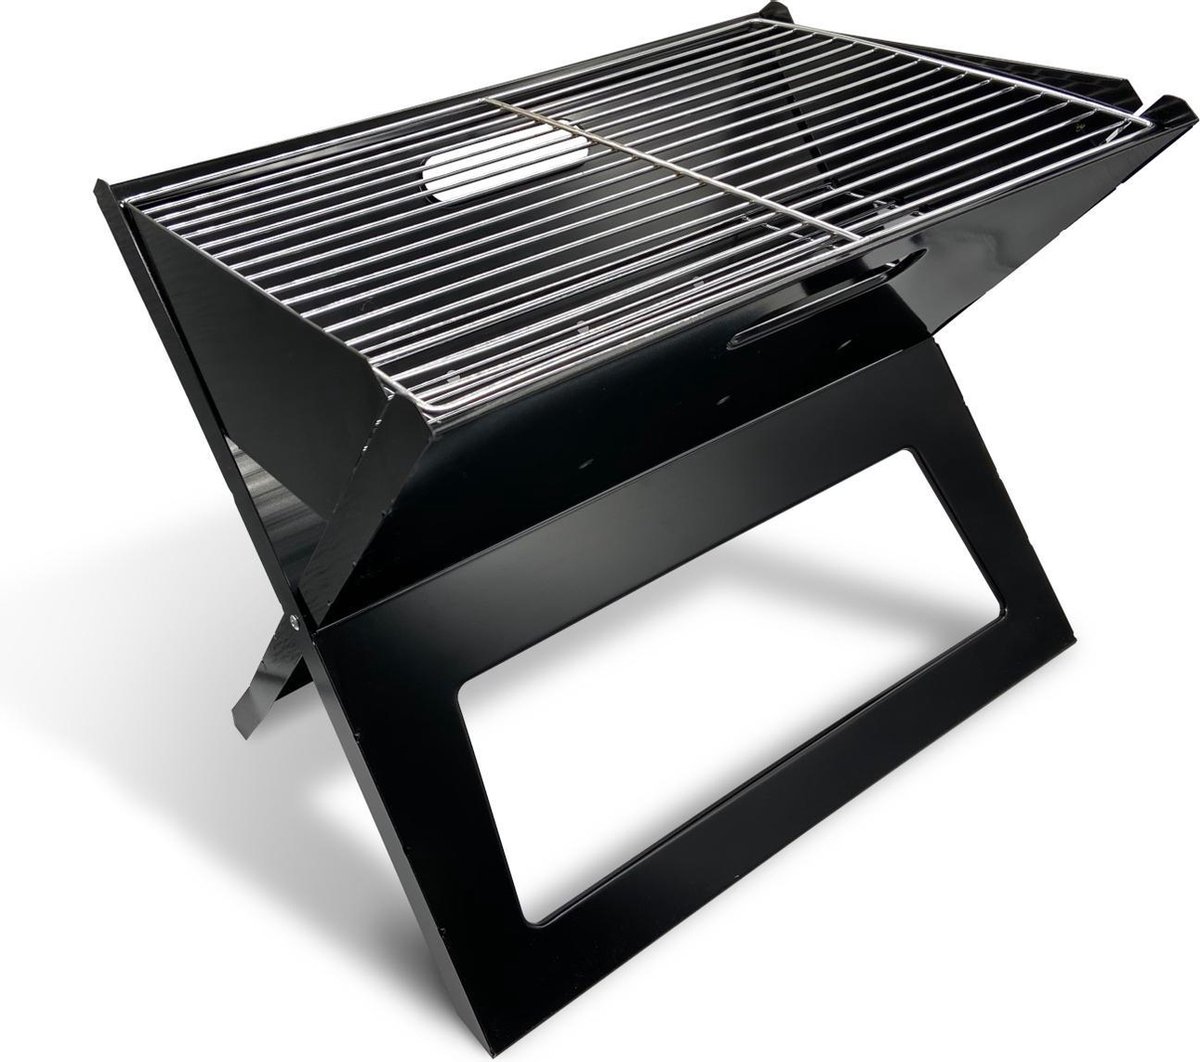 Draagbare opvouwbare grill met rooster - Zwart